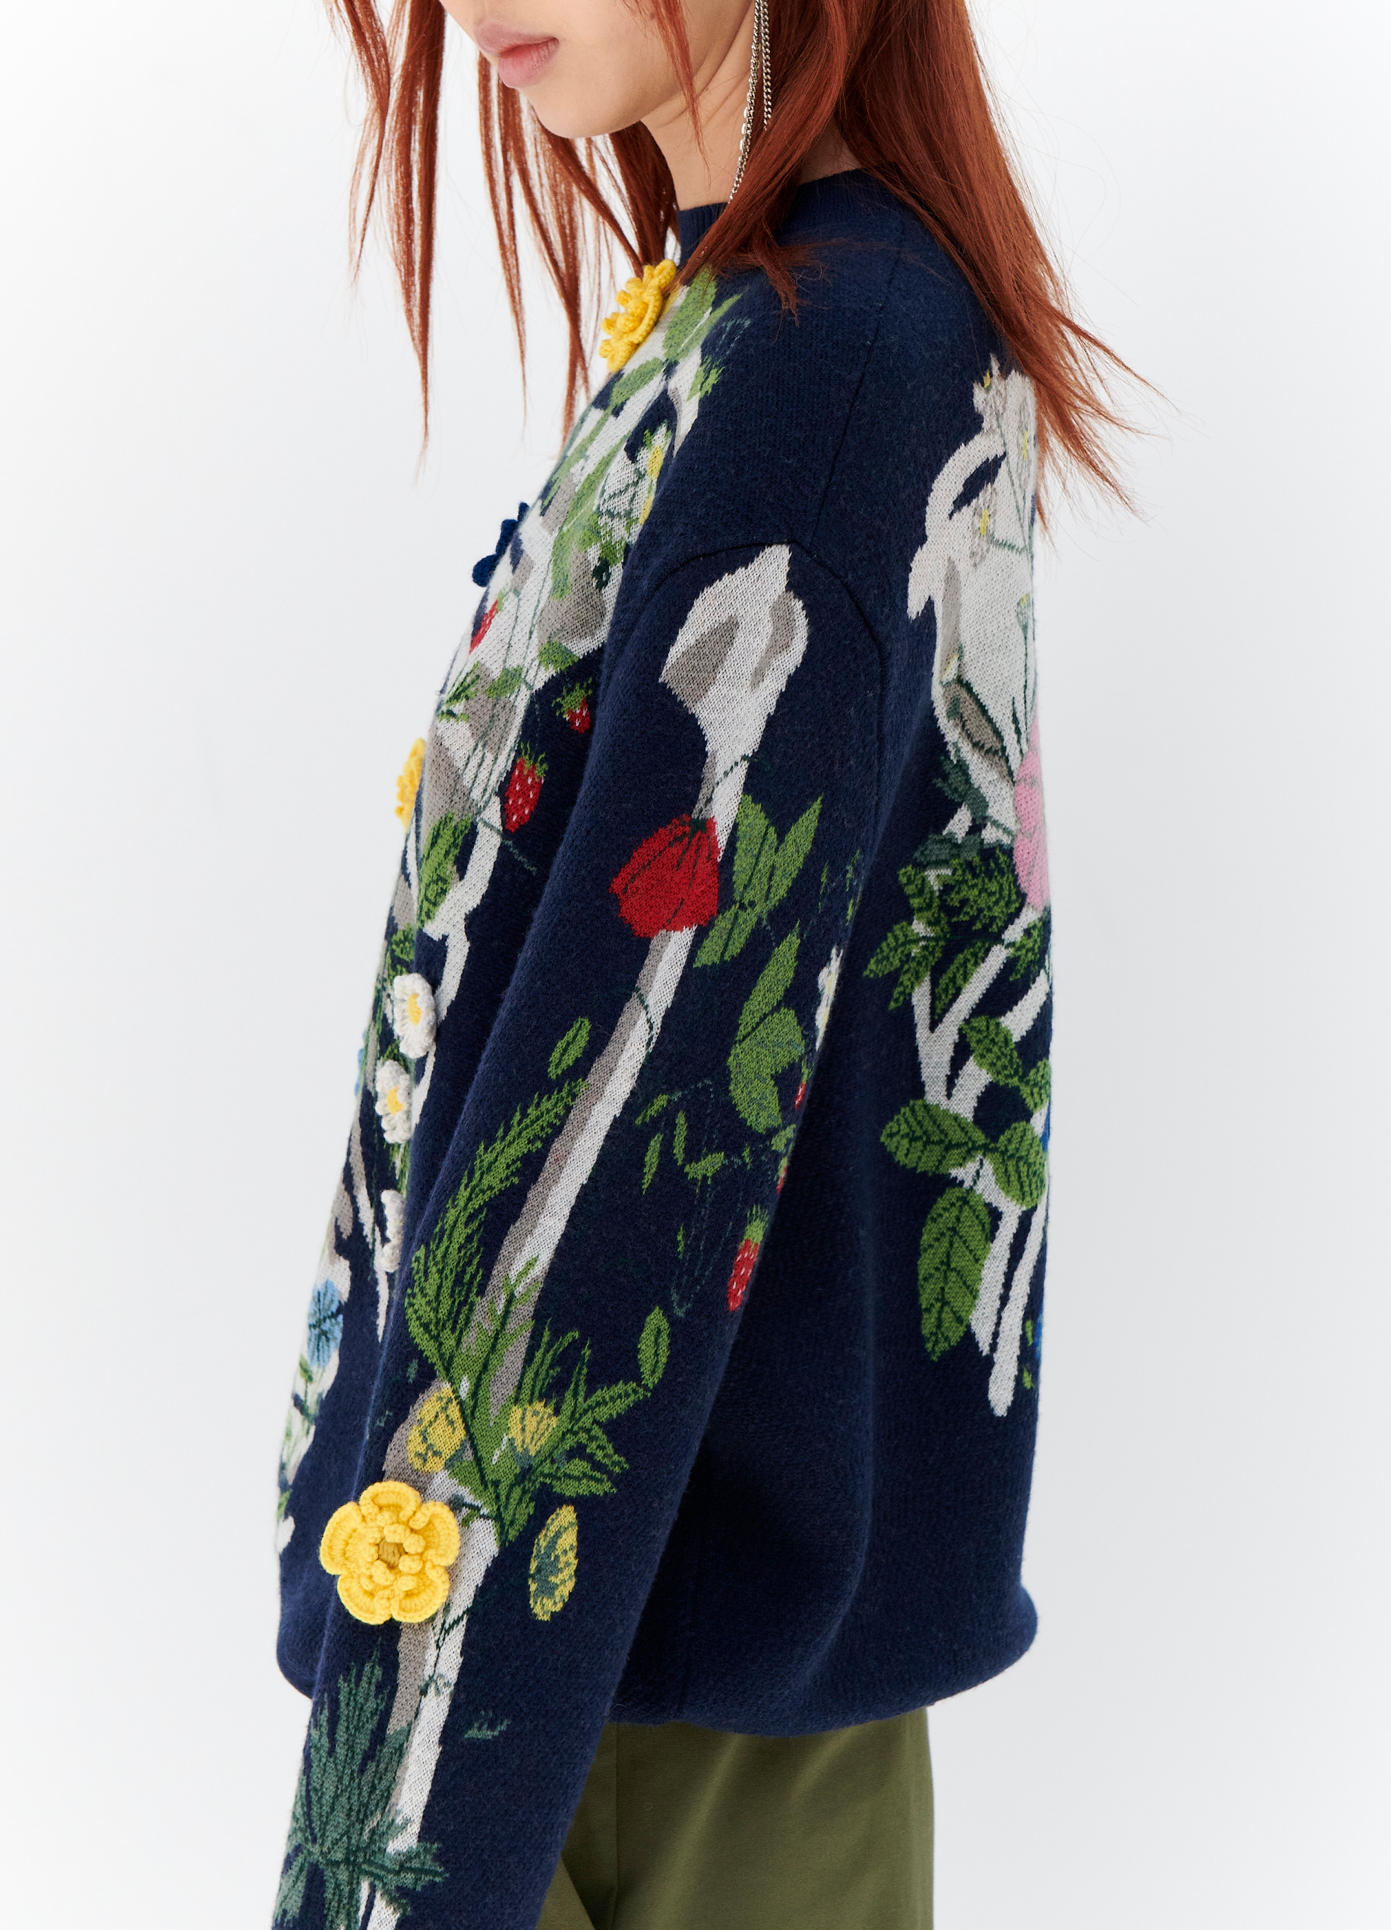 MONSE Floral Skeleton Sweater in Navy on model side view